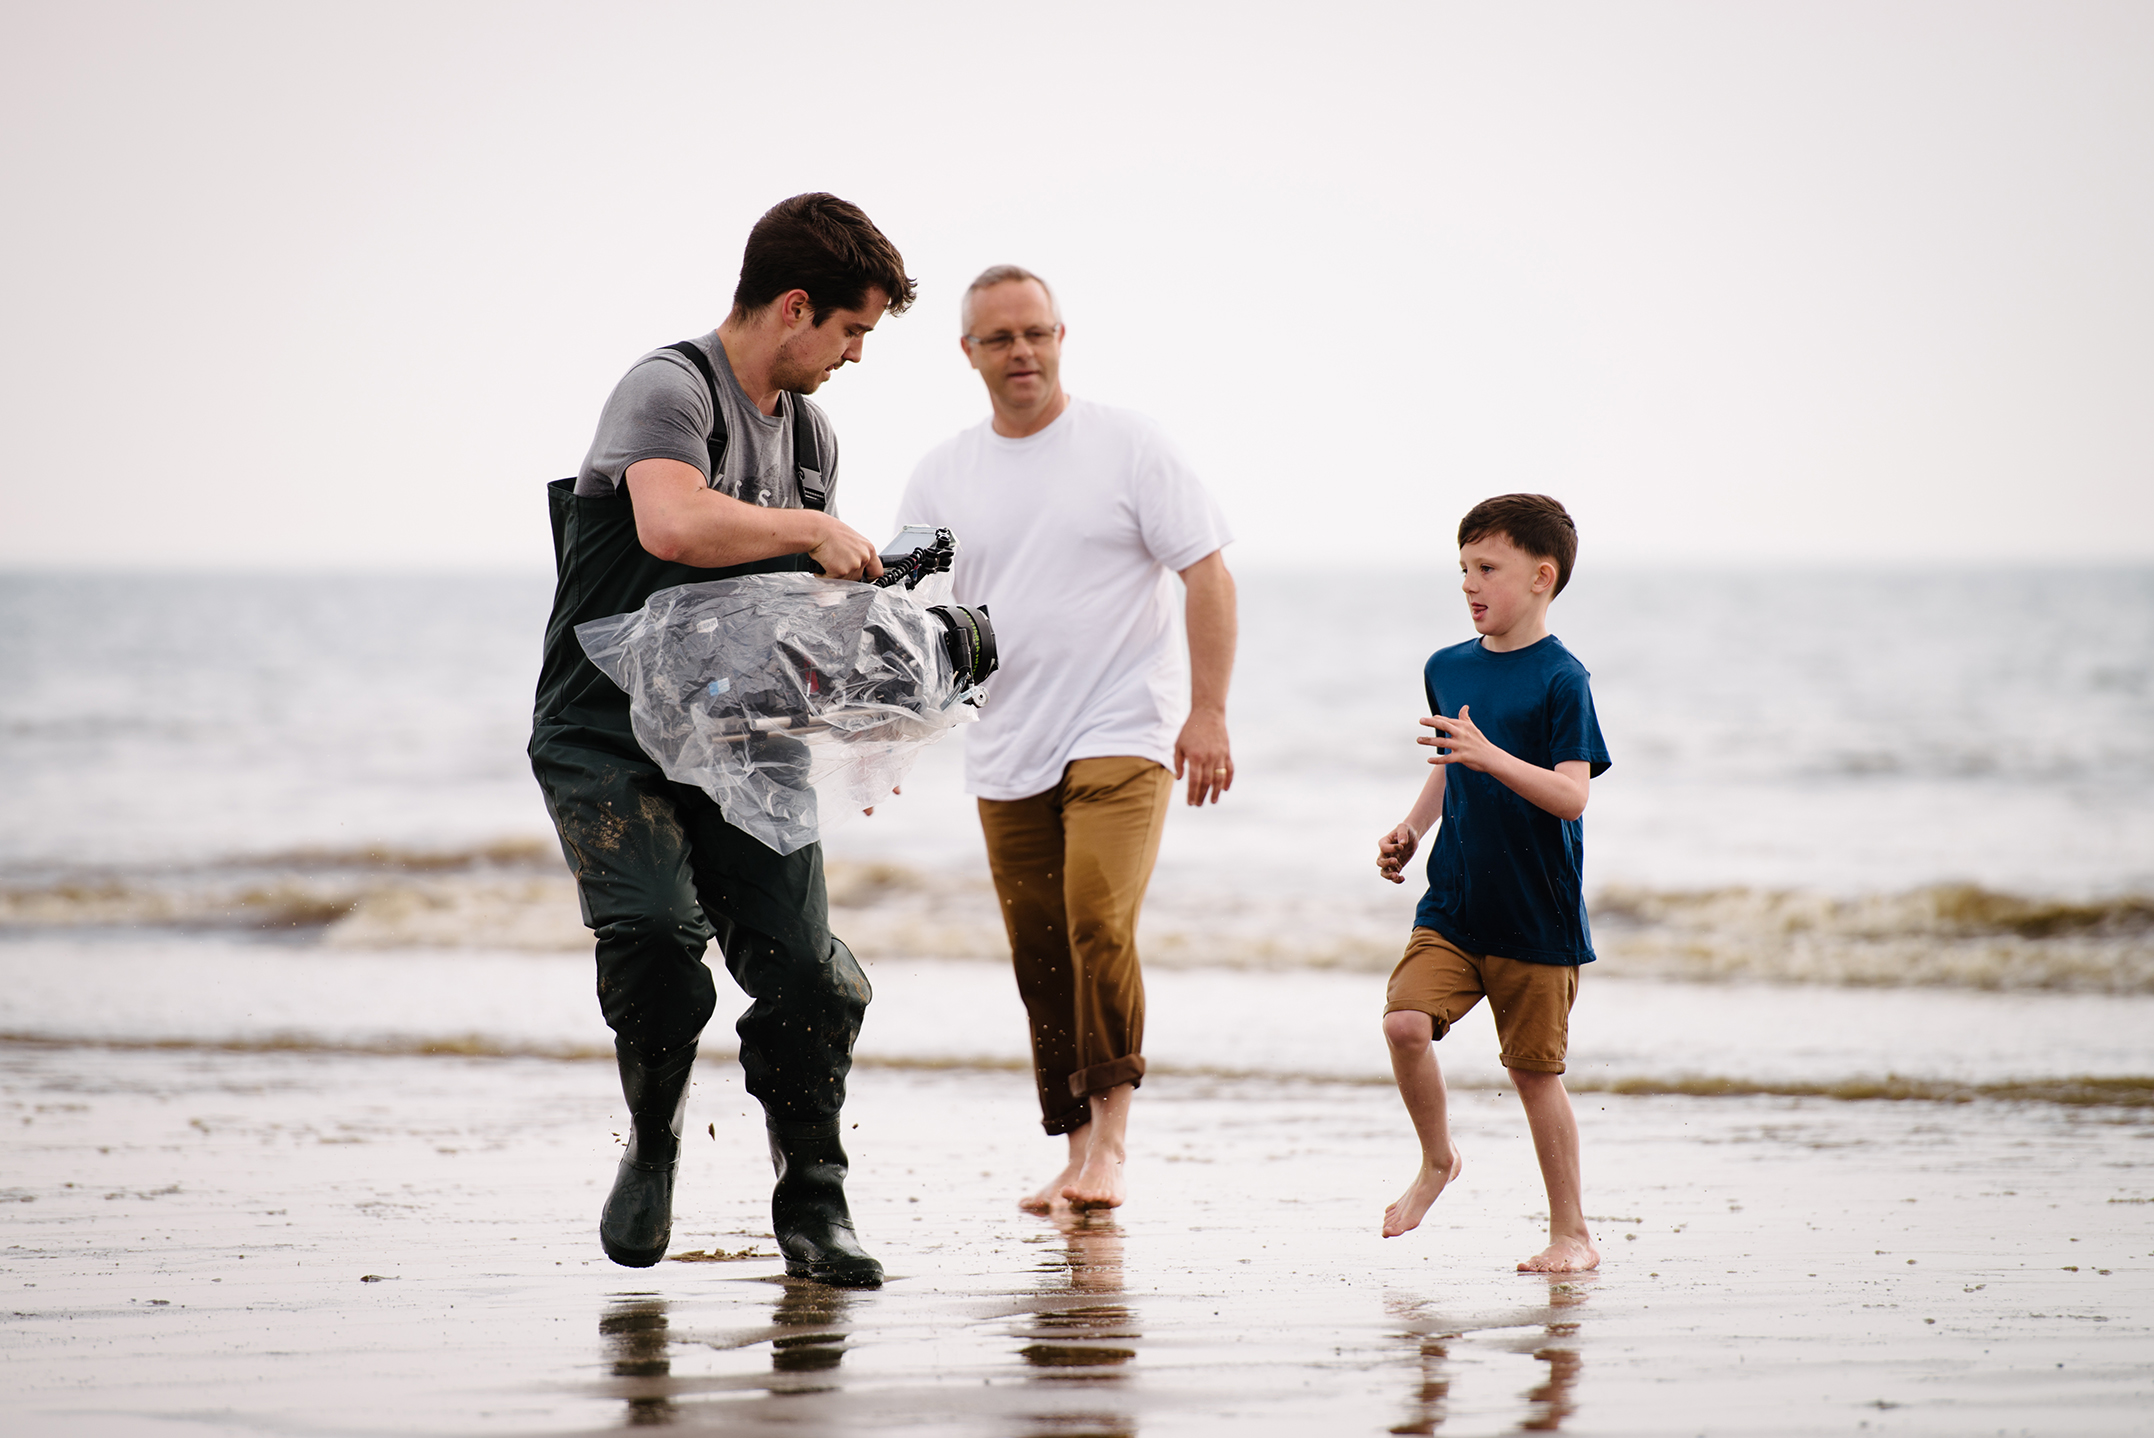 Production filming man and son on the beach